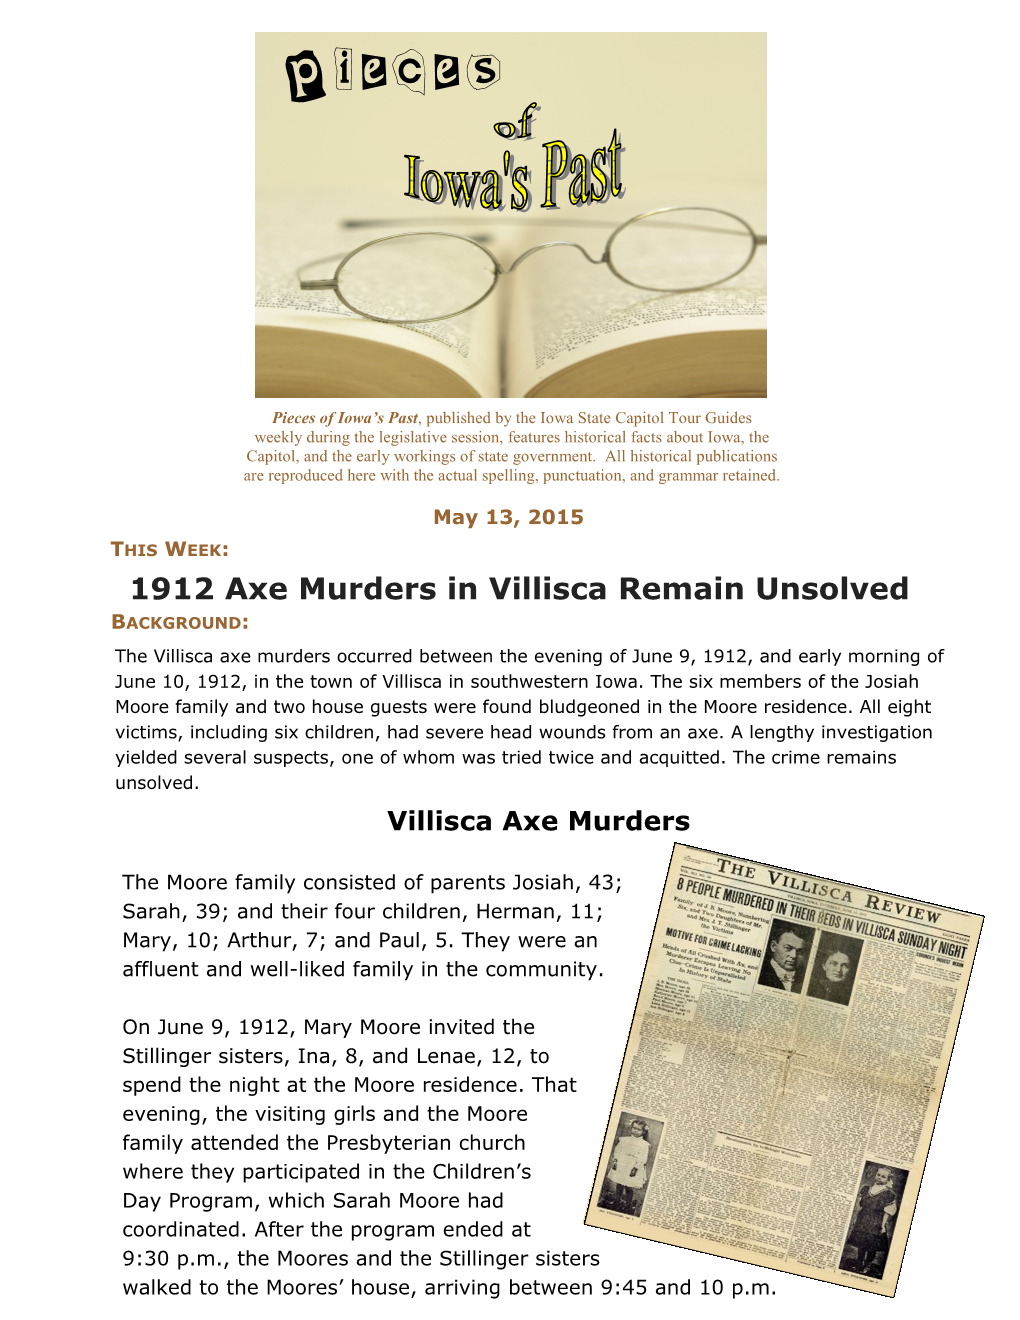 1912 Axe Murders in Villisca Remain Unsolved